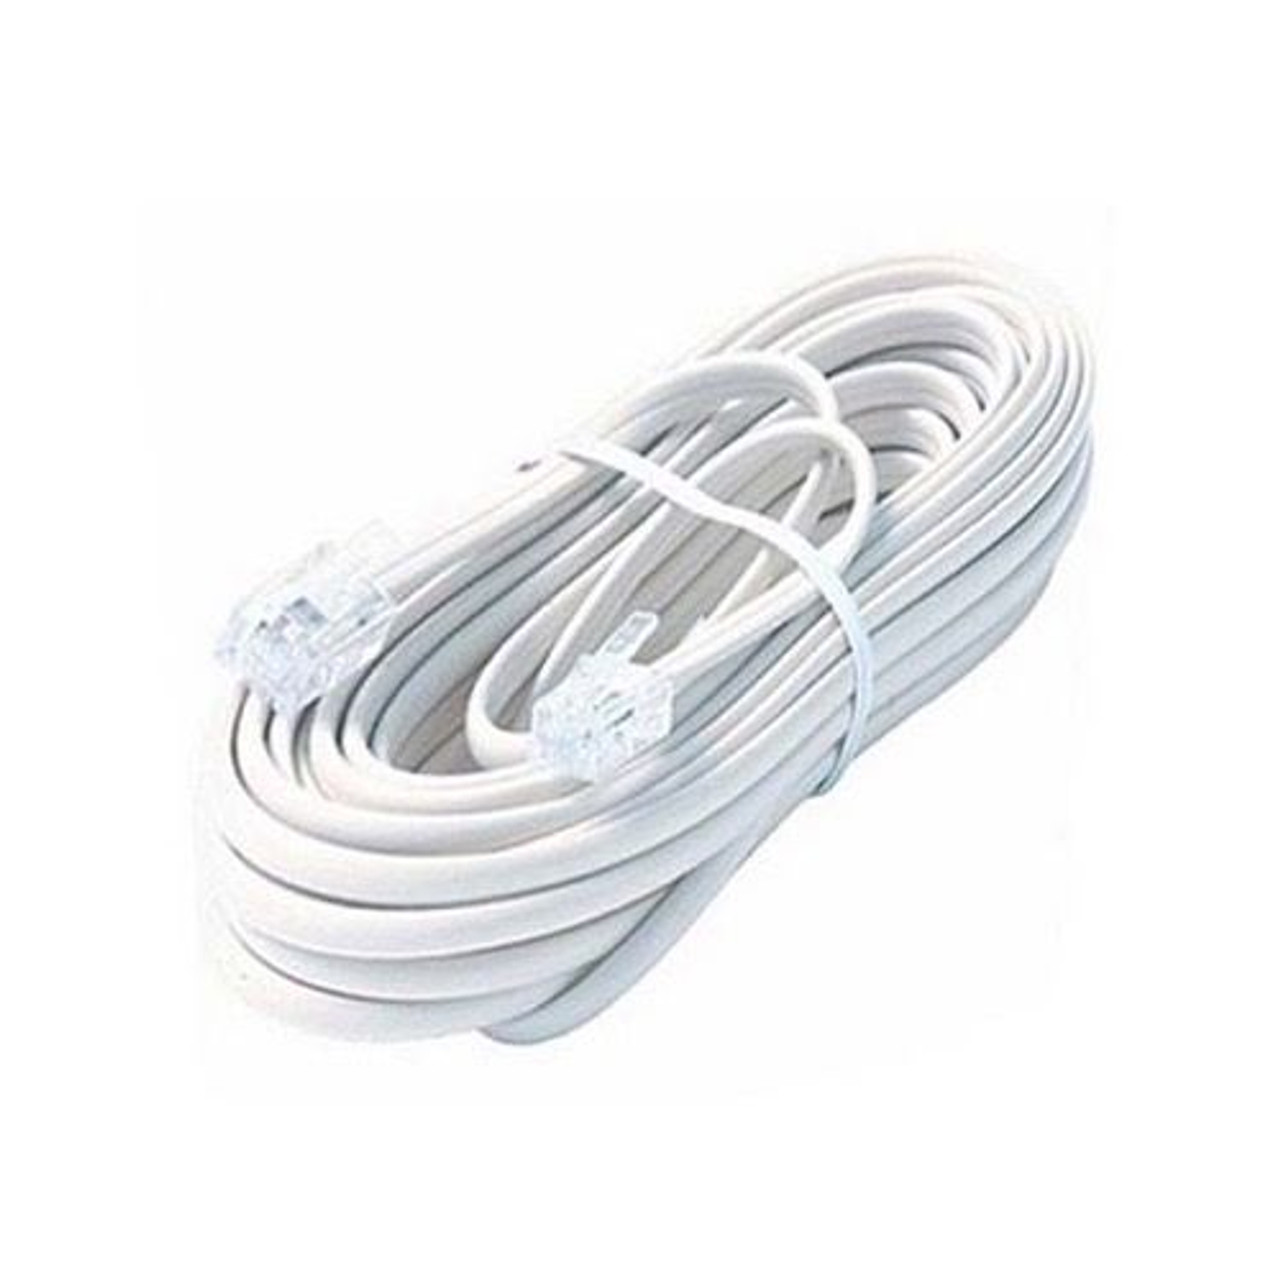 Steren 304-100WH 4 Conductor 100' FT Modular Line with Ends White Telephone Cable 6P4C RJ11 Male Connectors Ultra Flexible PVC Cord Extension RJ-11 Jack Data Signal Transfer, Part # 304100-WH